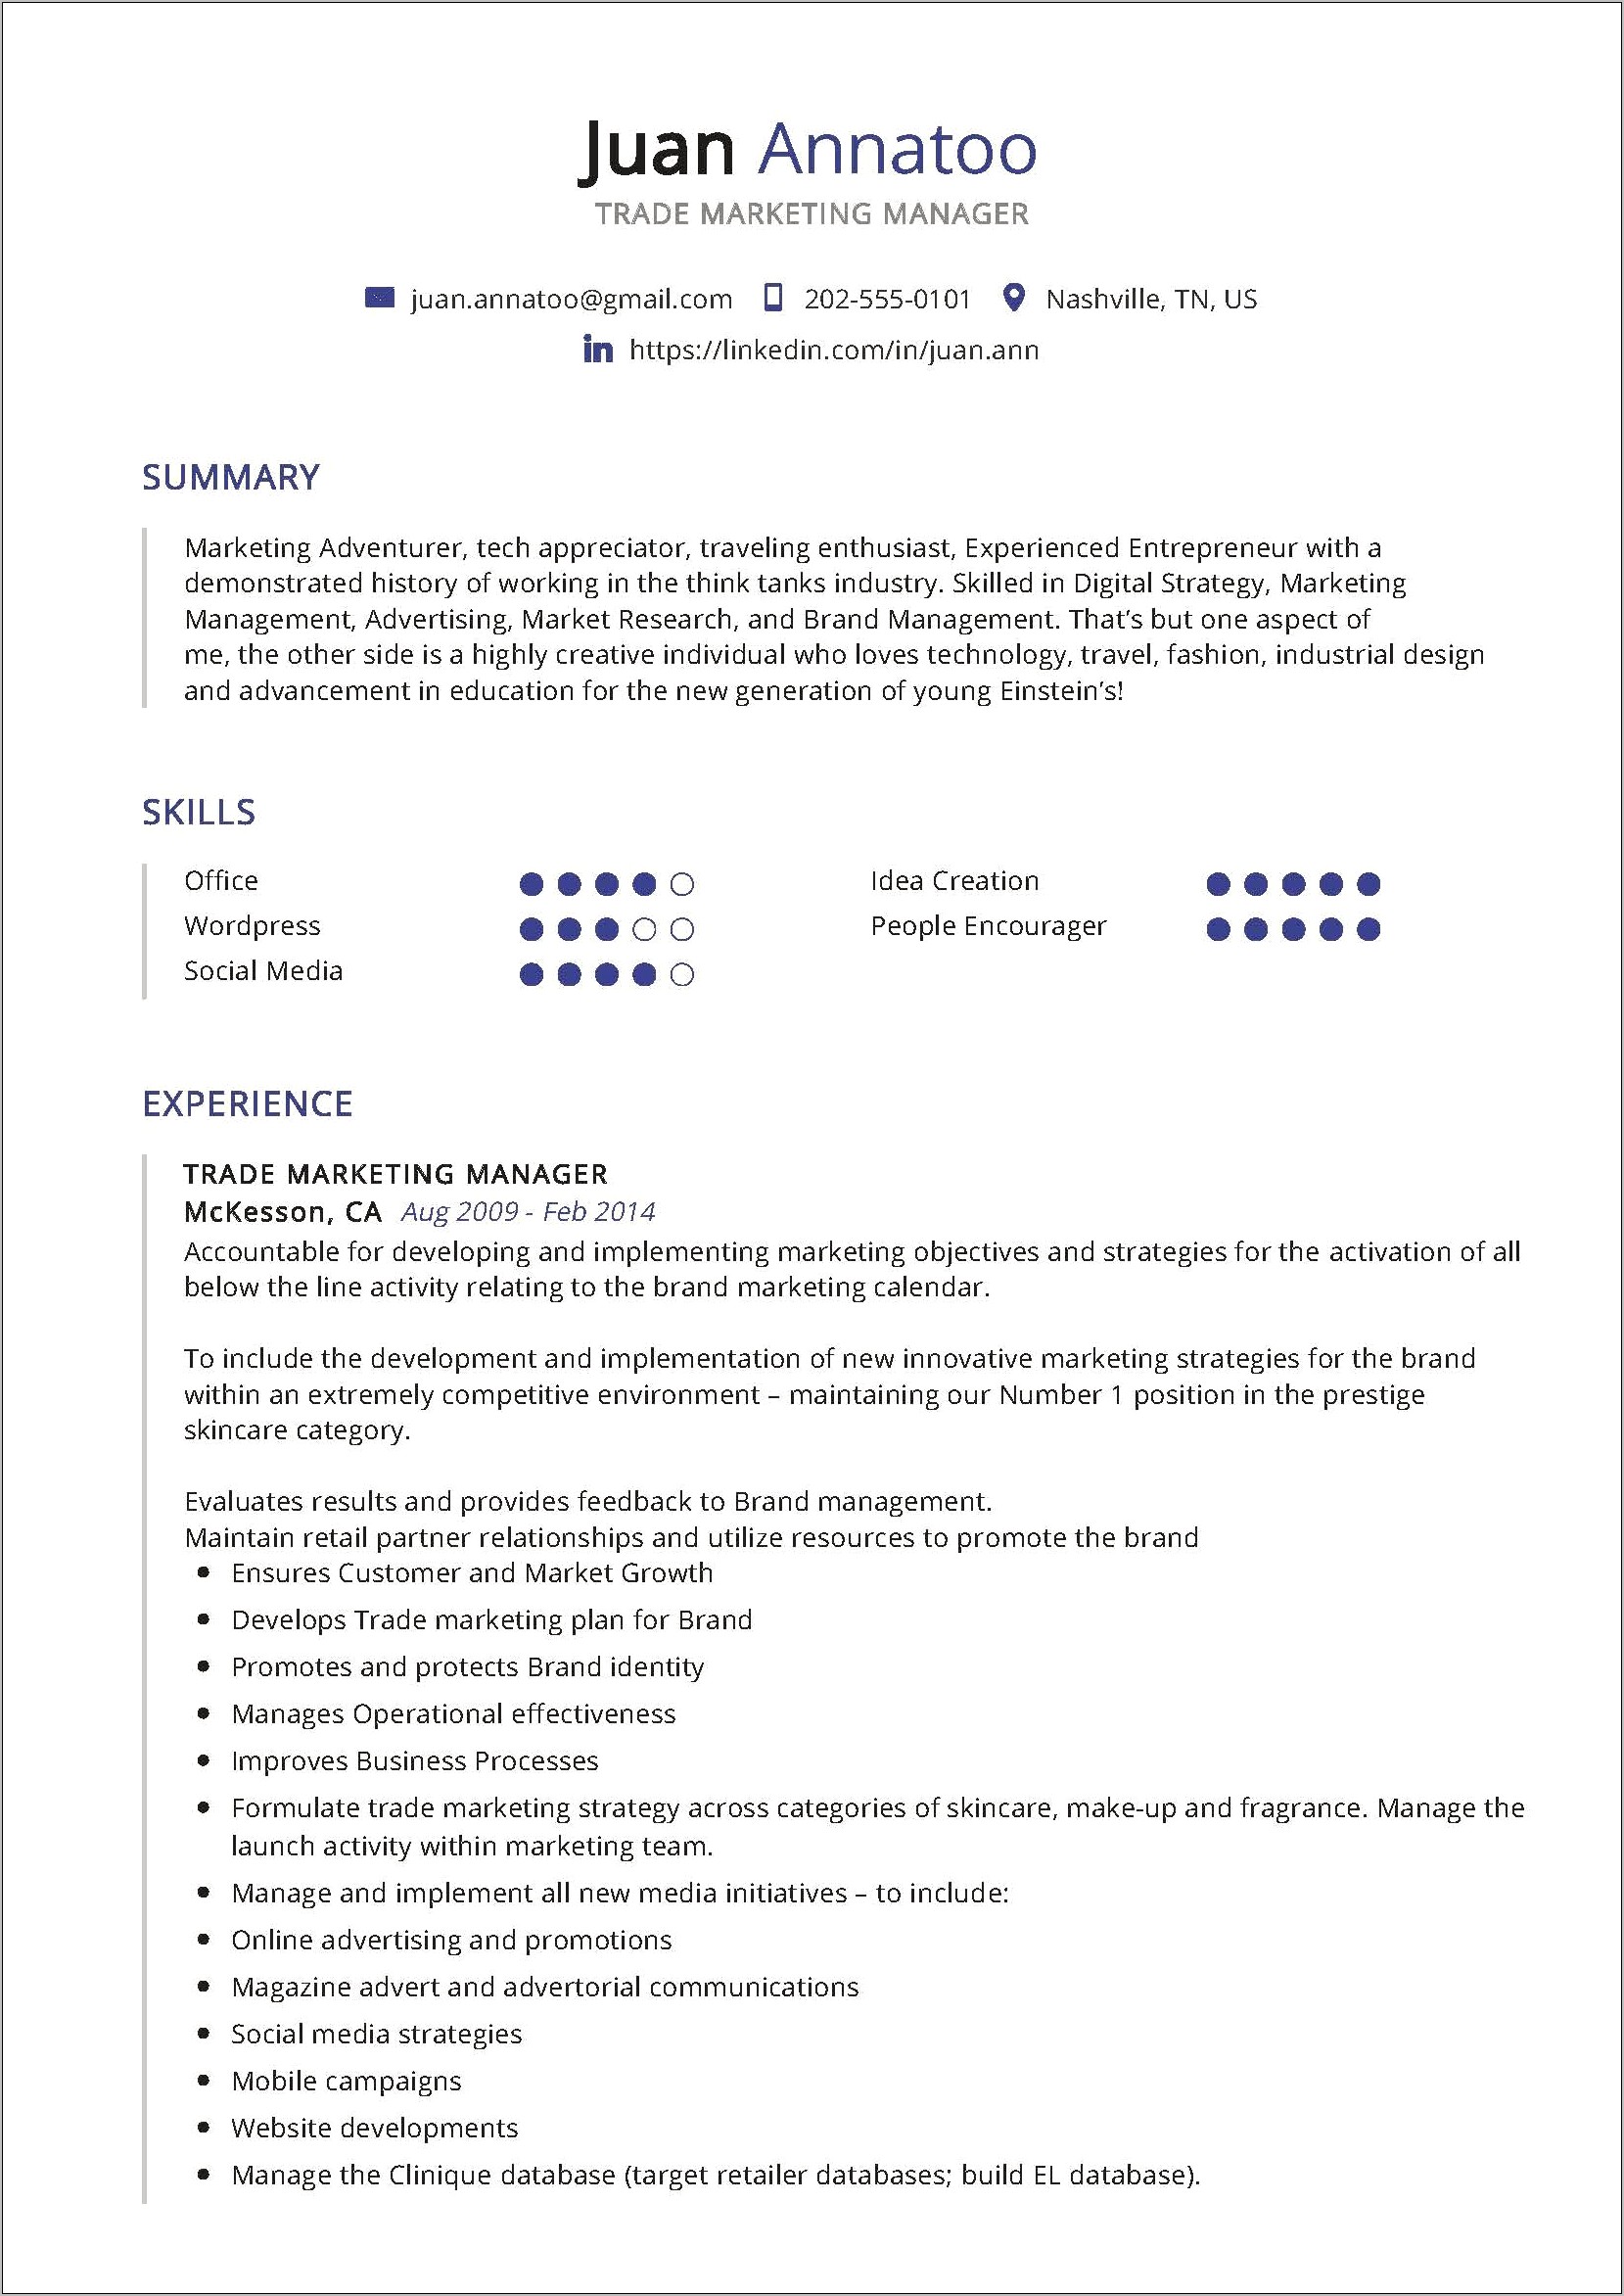 Resume Writing Services For Skilled Tades